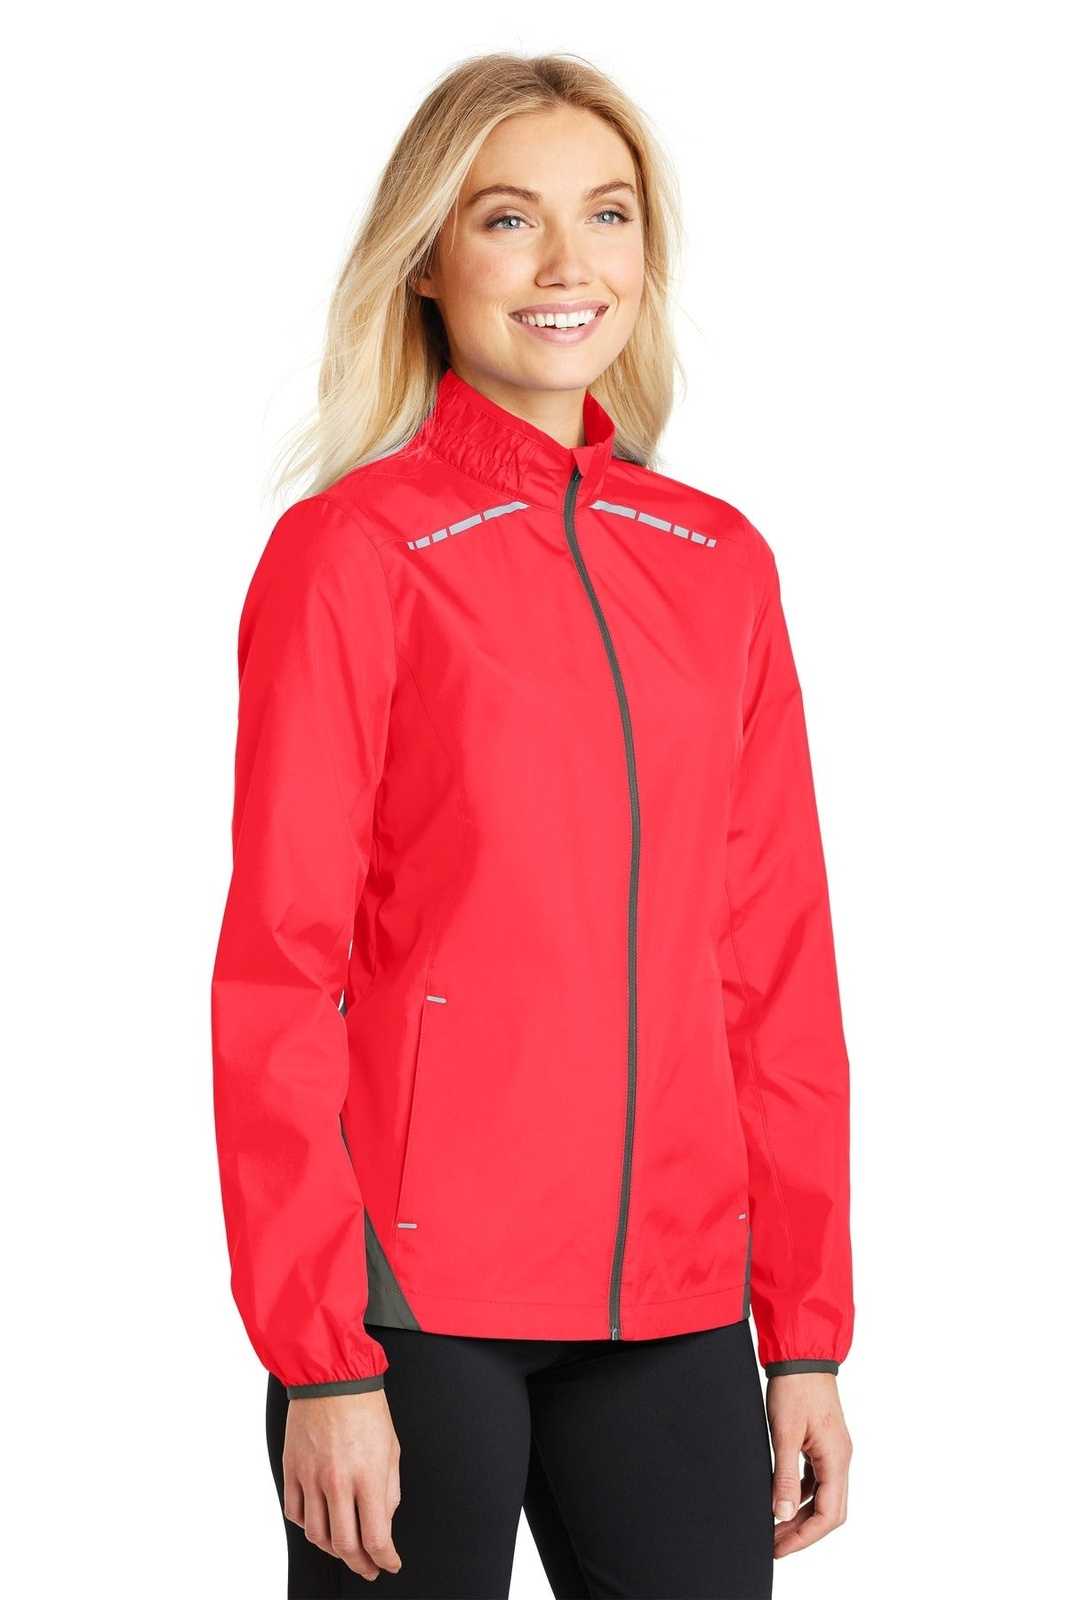 Port Authority L345 Ladies Zephyr Reflective Hit Full-Zip Jacket - Hot Coral Gray Steel - HIT a Double - 4